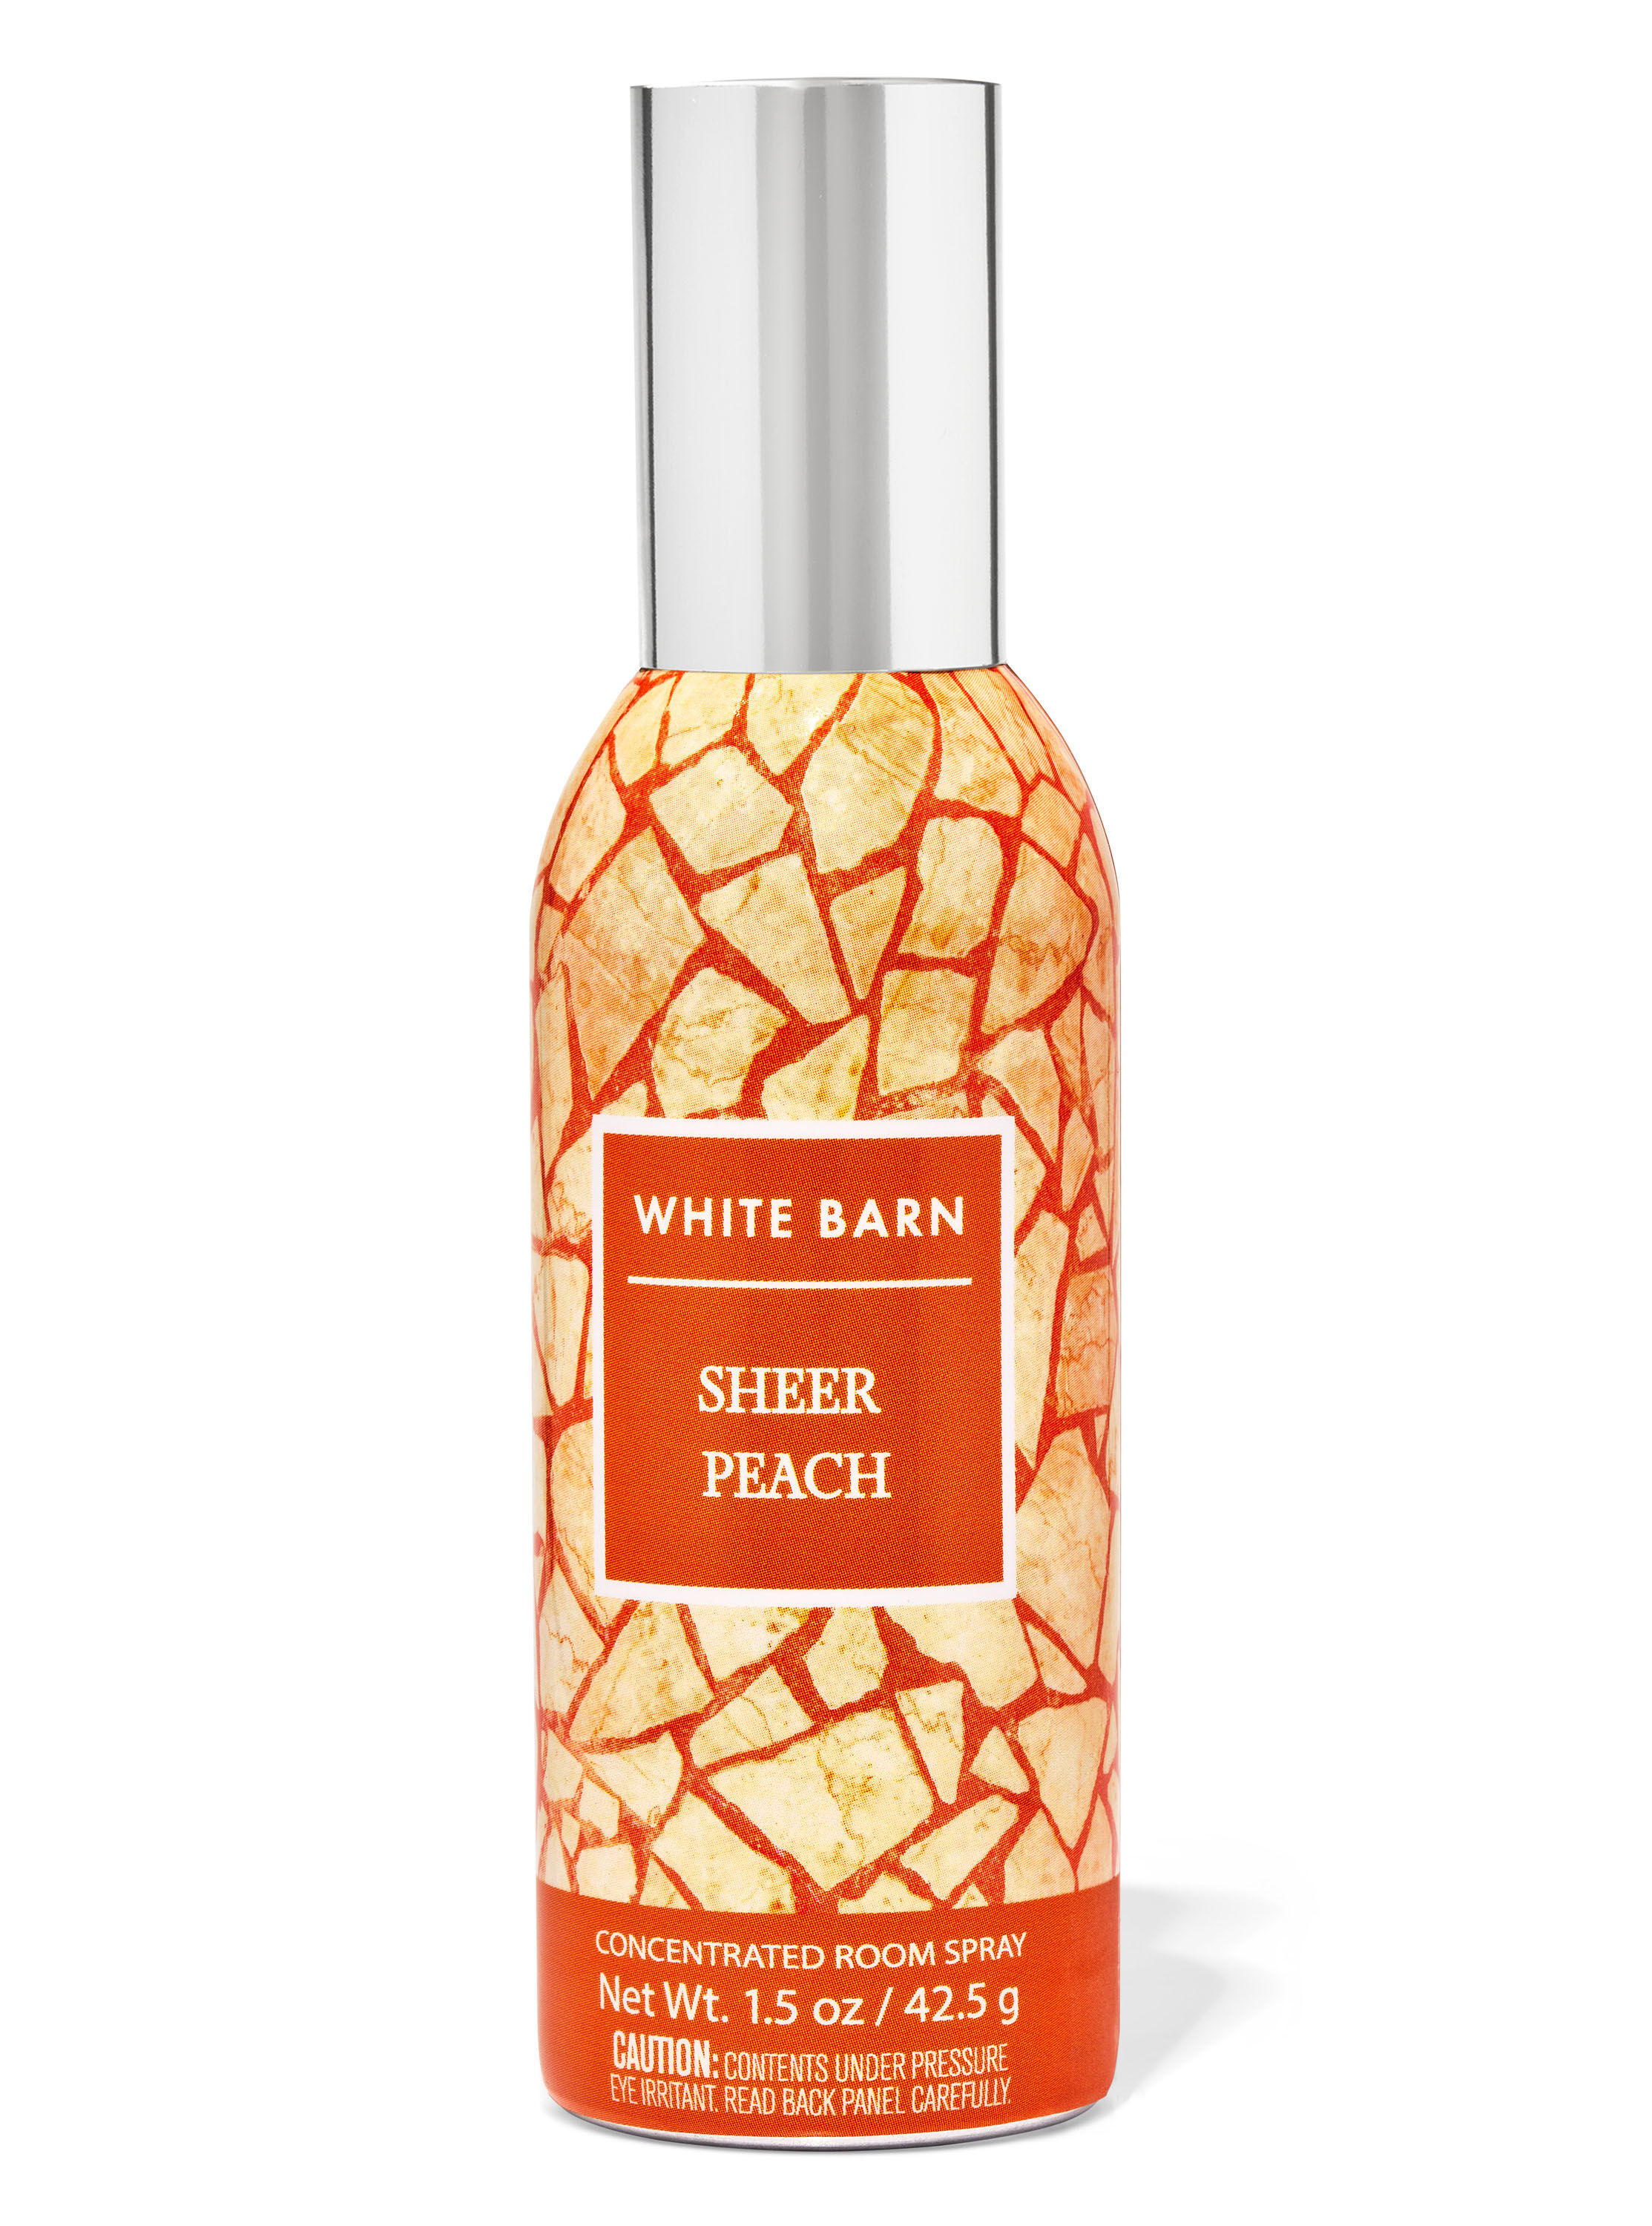 Sheer Peach Concentrated Room Spray